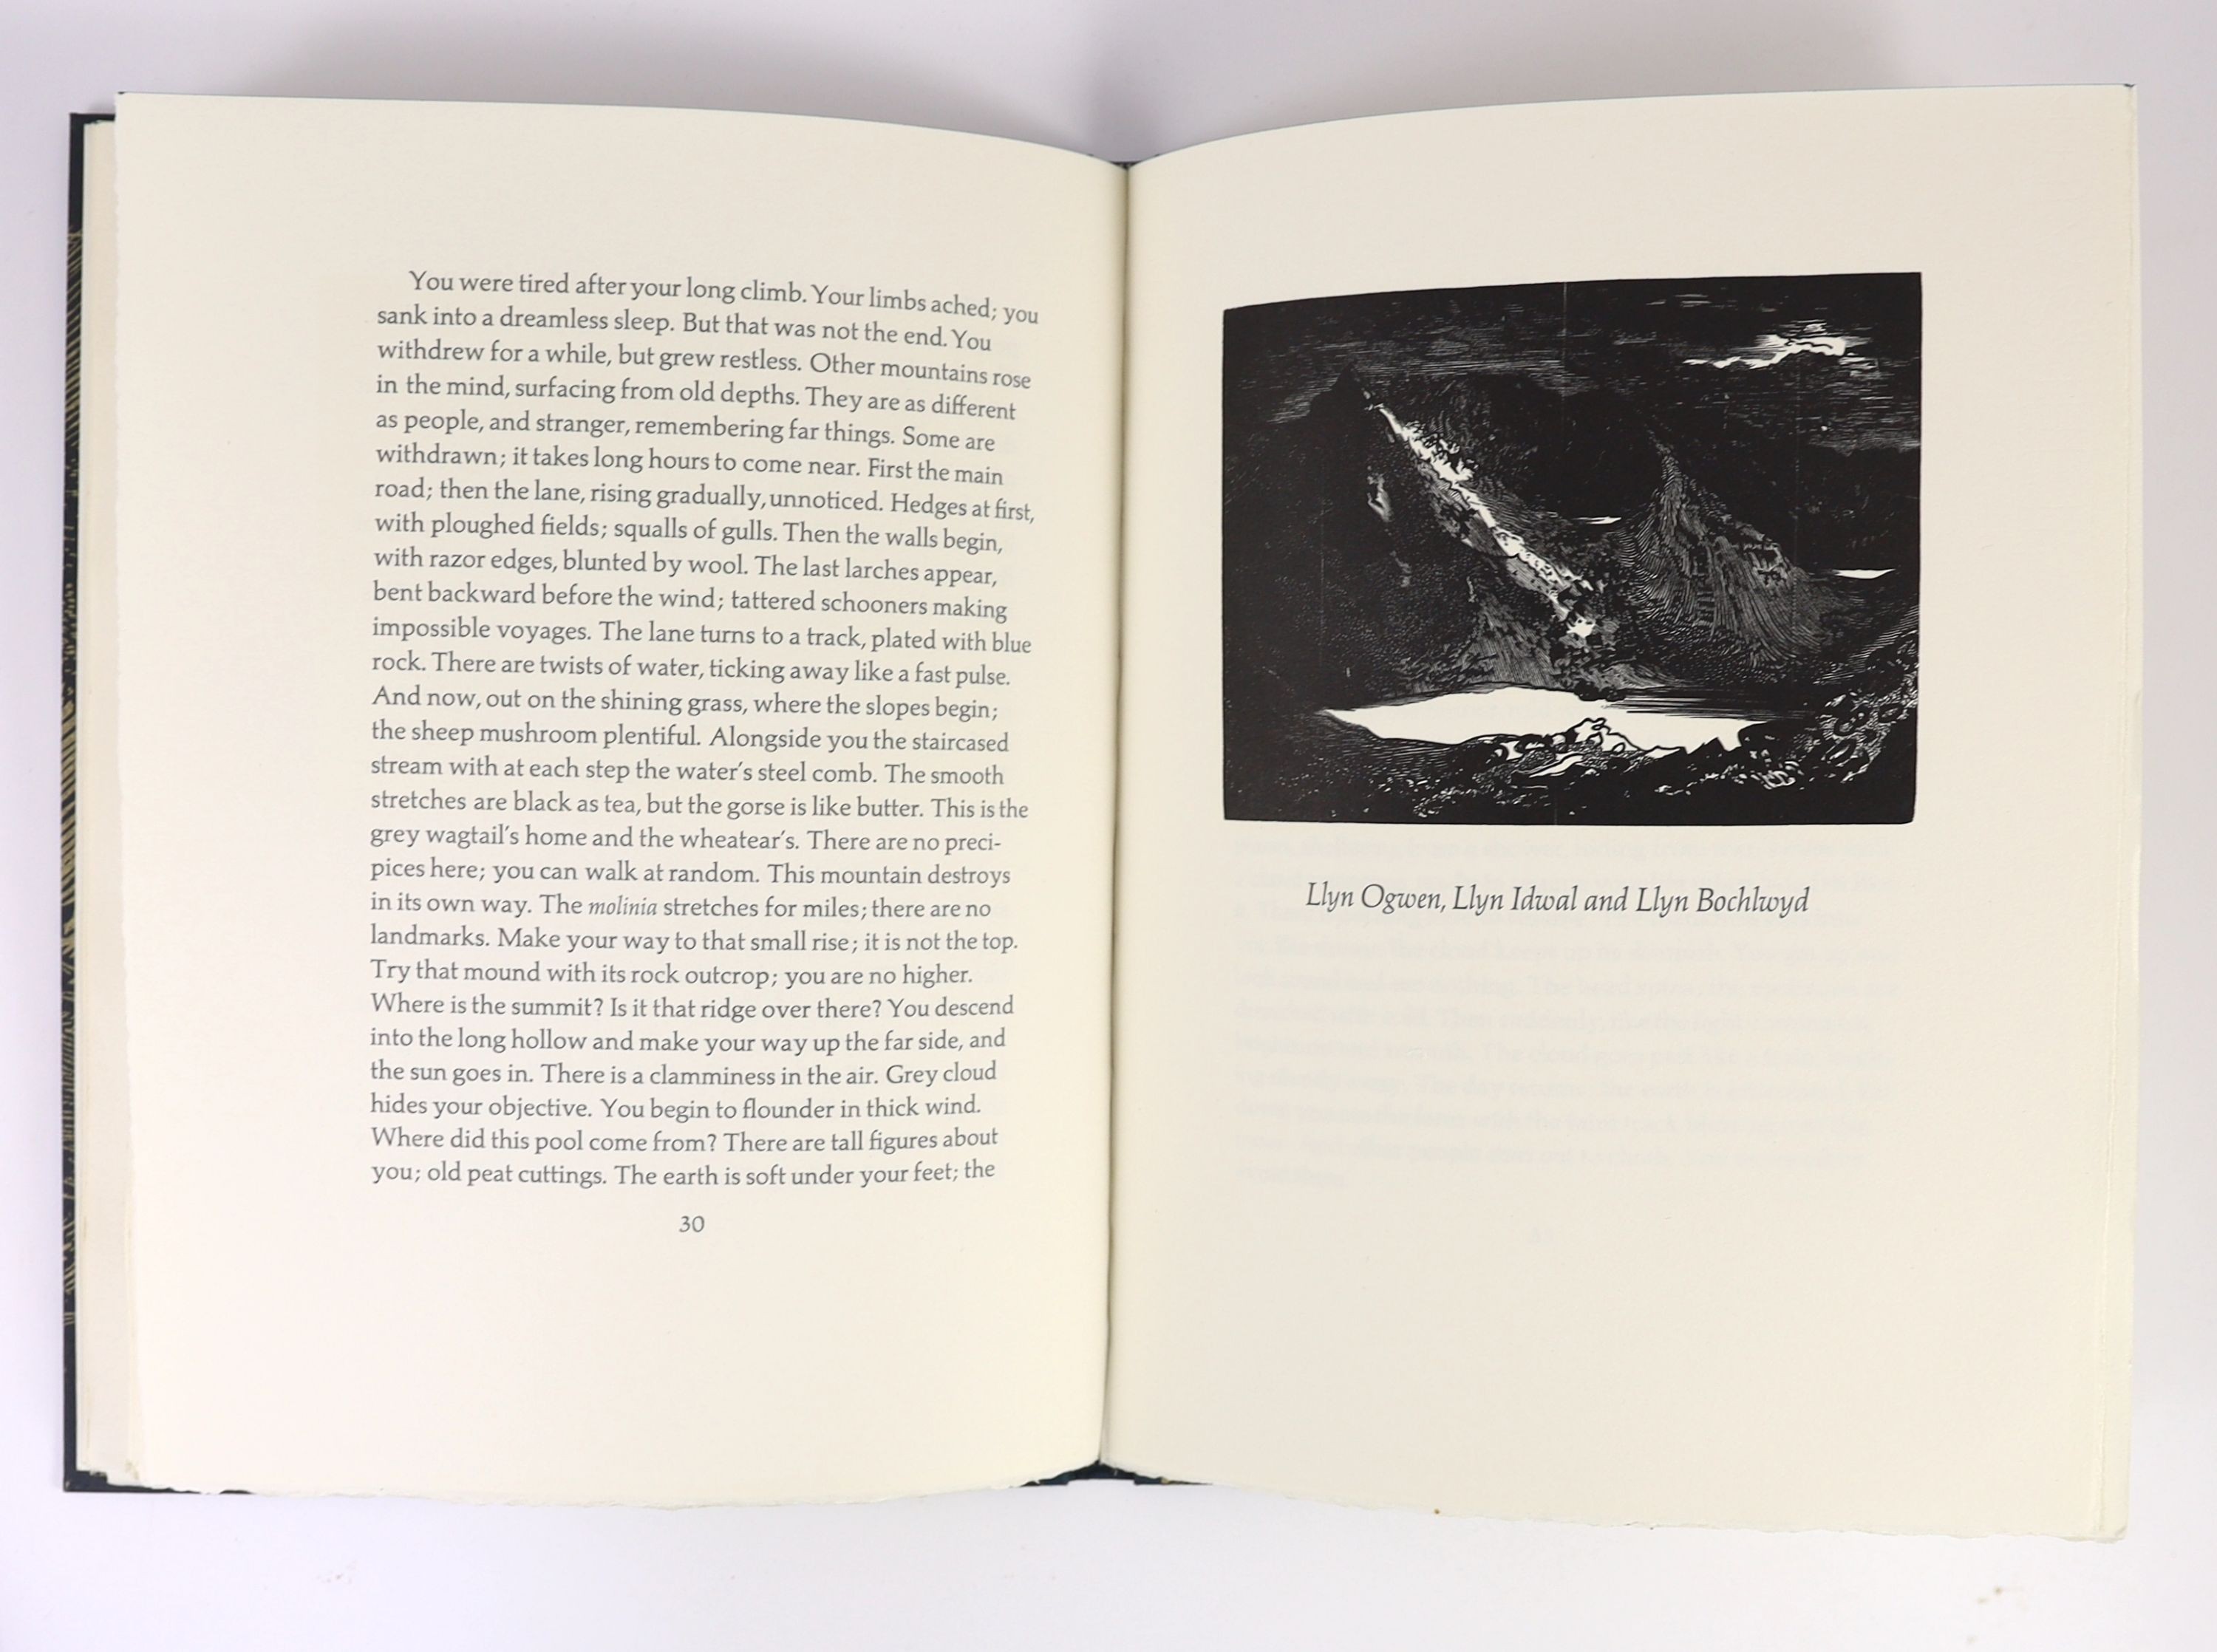 Thomas, Ronald Stuart - The Mountains, one of 350, illustrated by John Piper, with 10 plates, 4to, original half cloth, Chilmark Press, New York, 1968, in slip case.